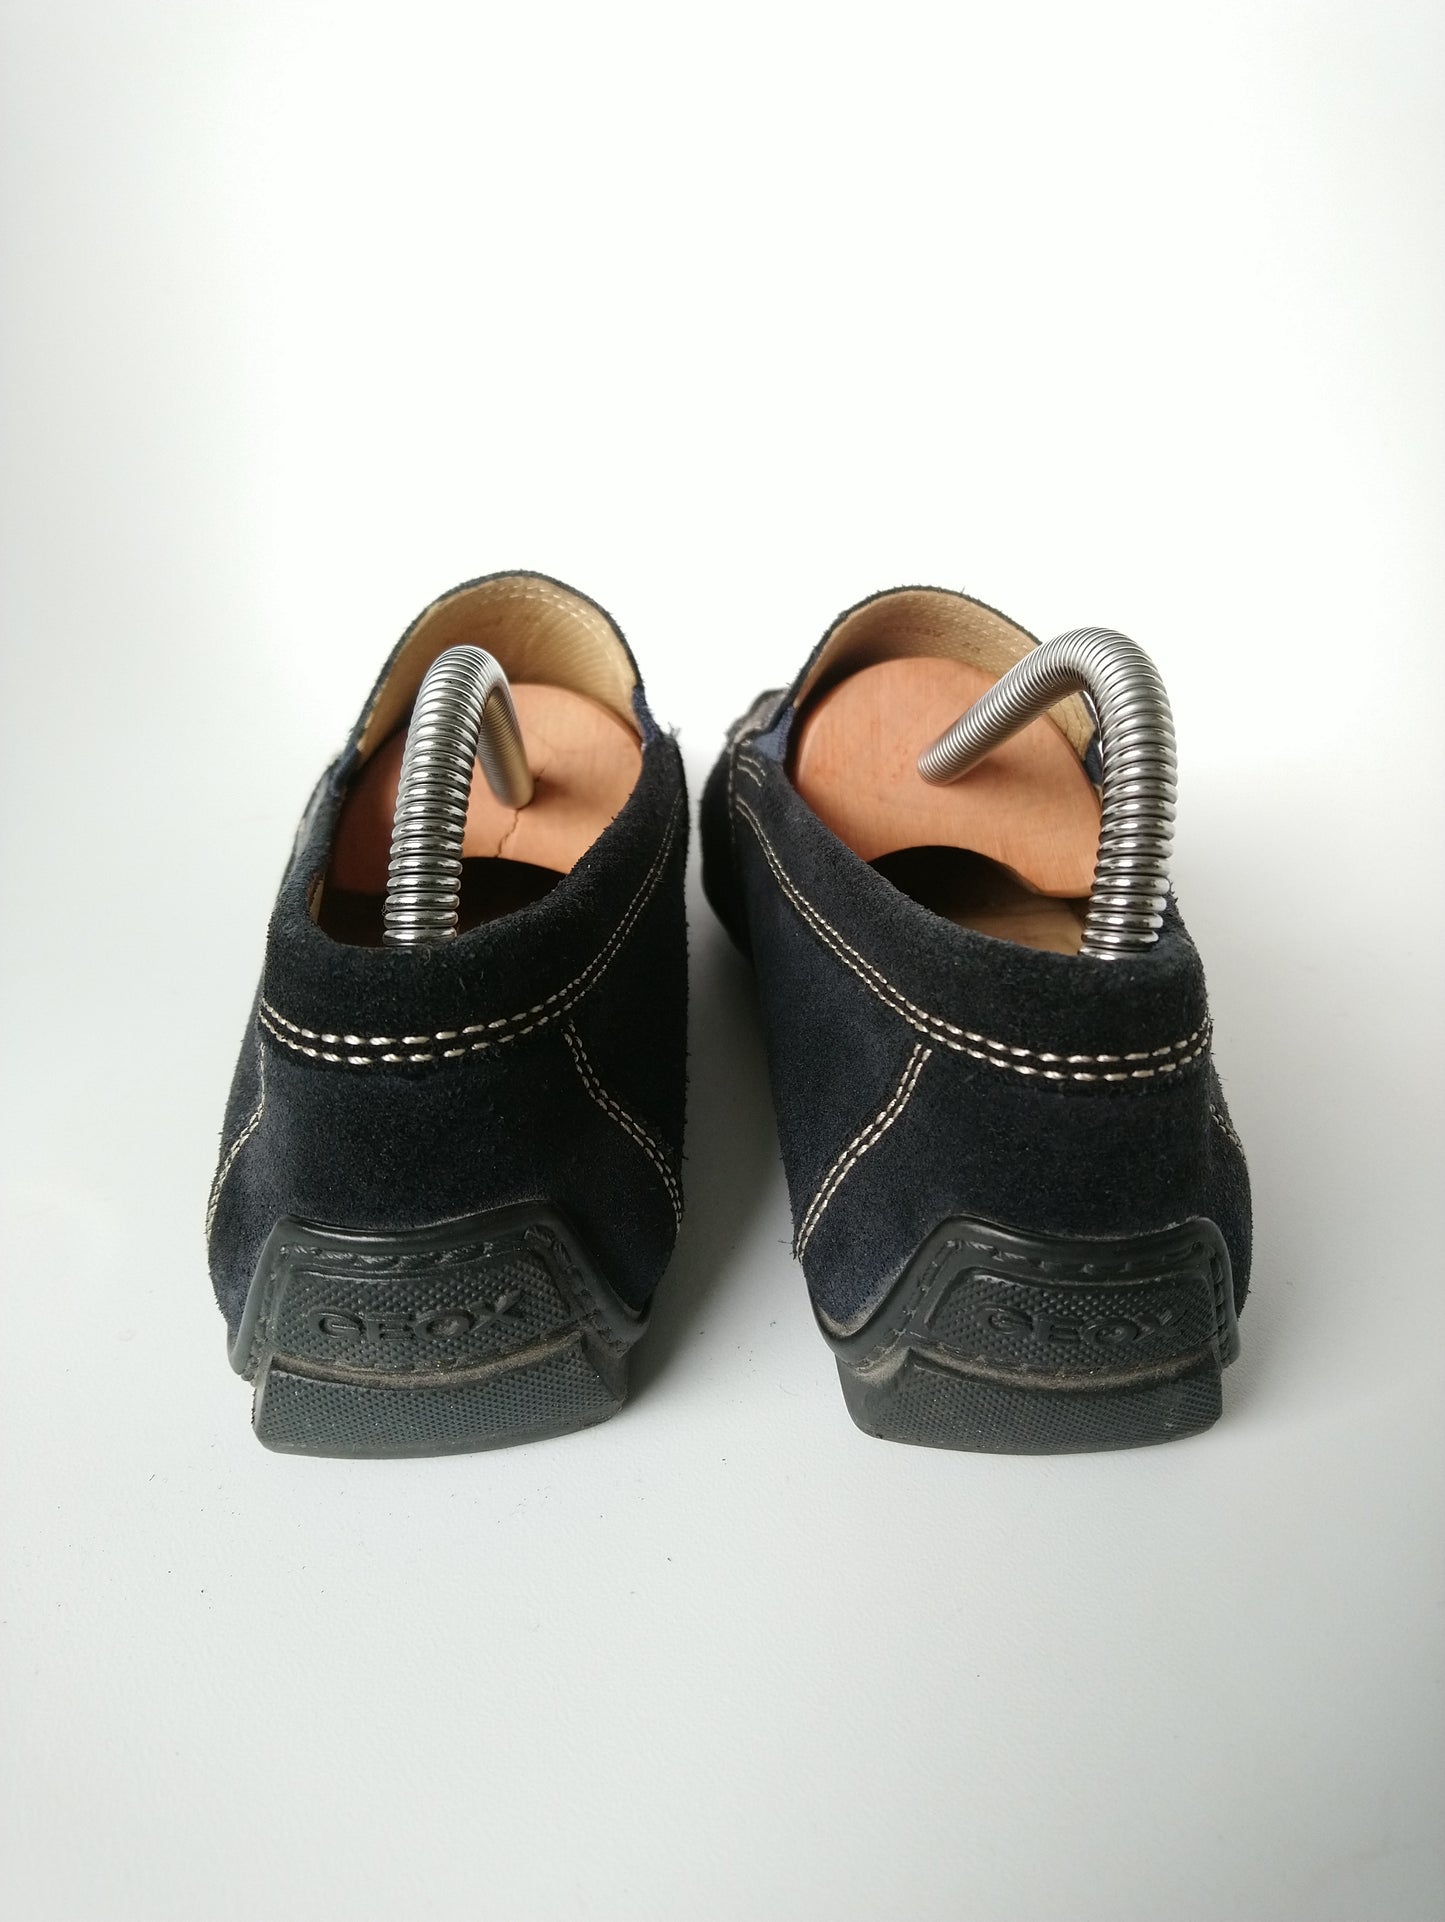 Geox Respira Leather Moccasins. Dark blue colored. Size 40.